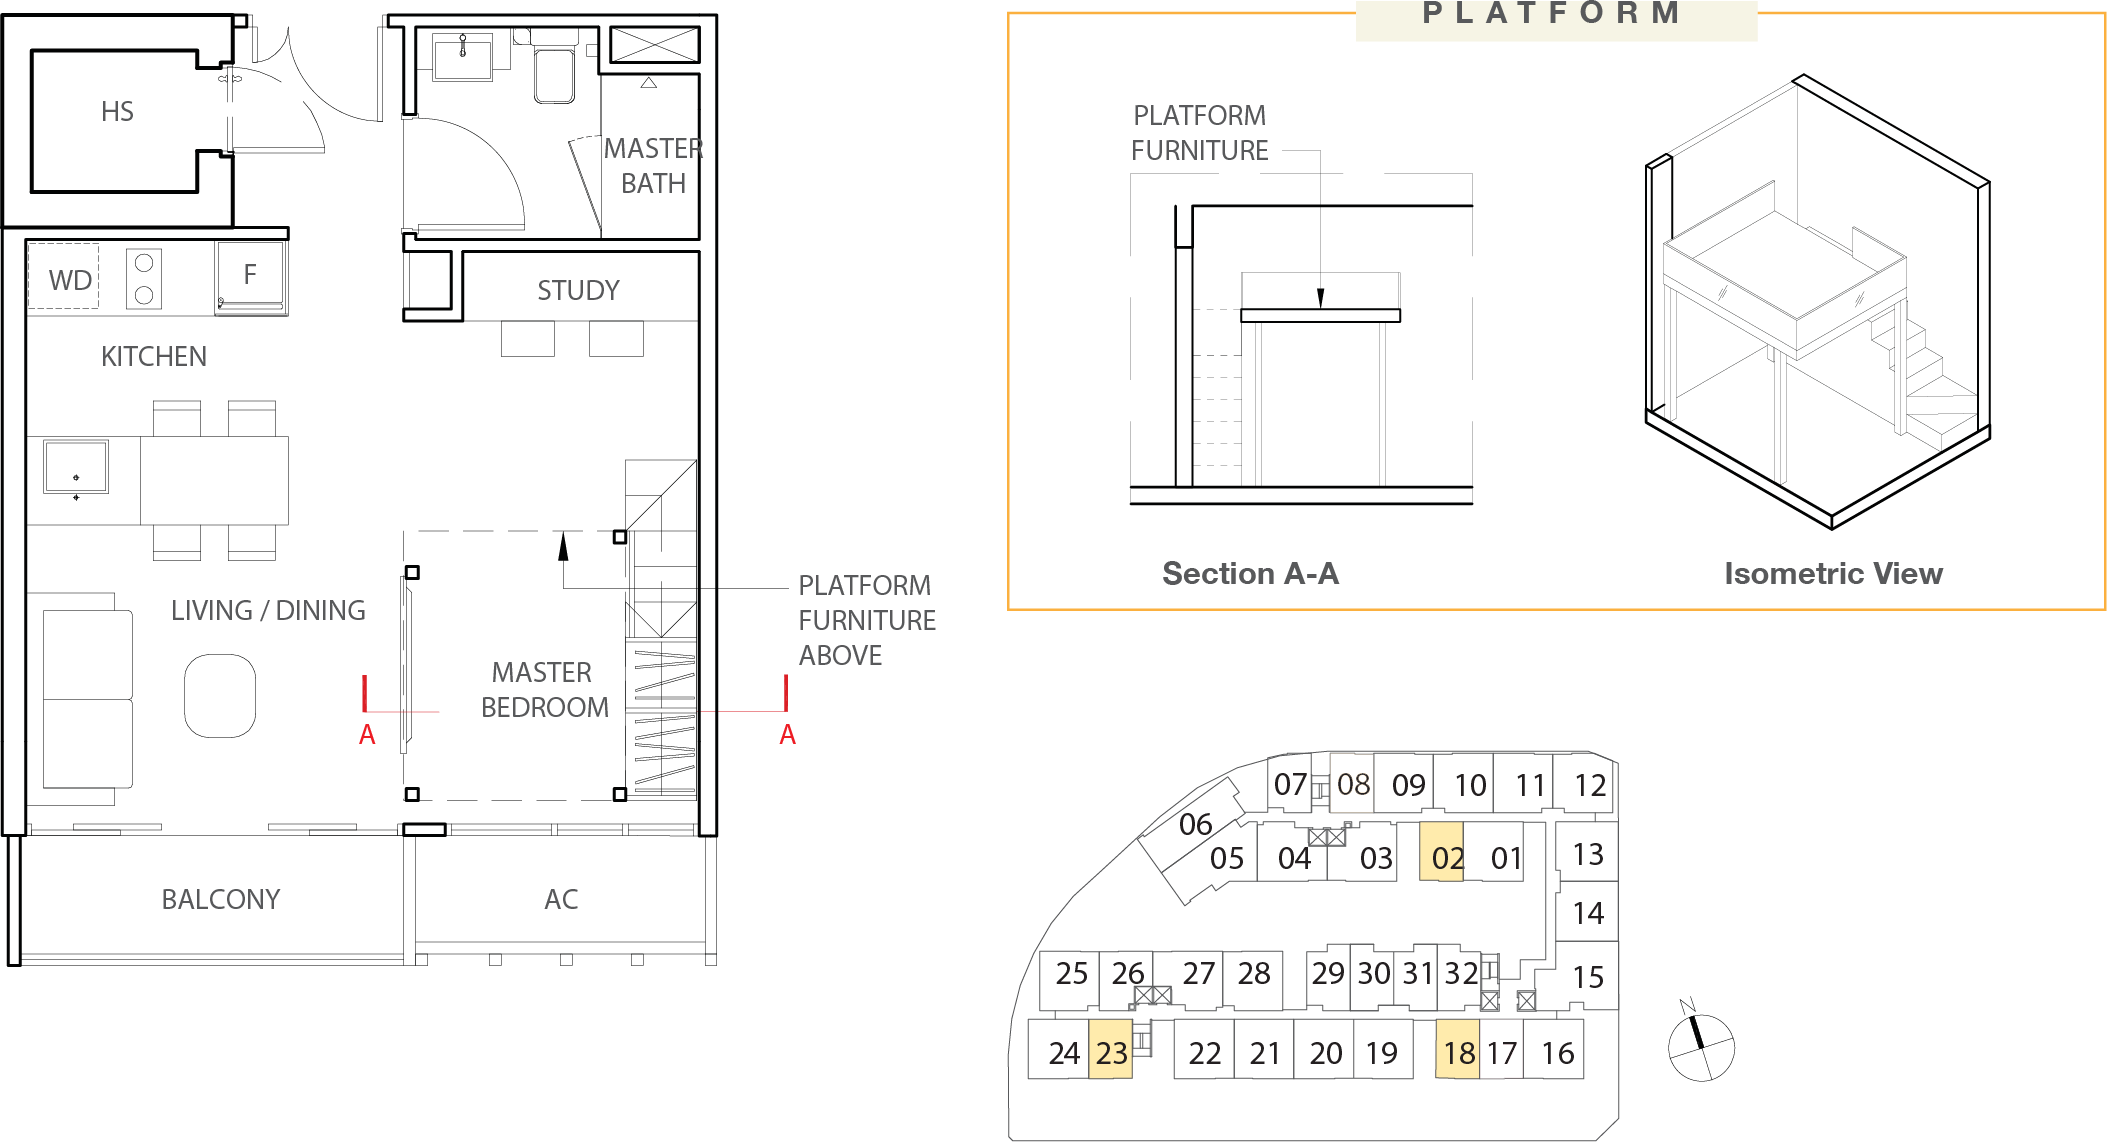 Floor Plan for Residential Type A-a